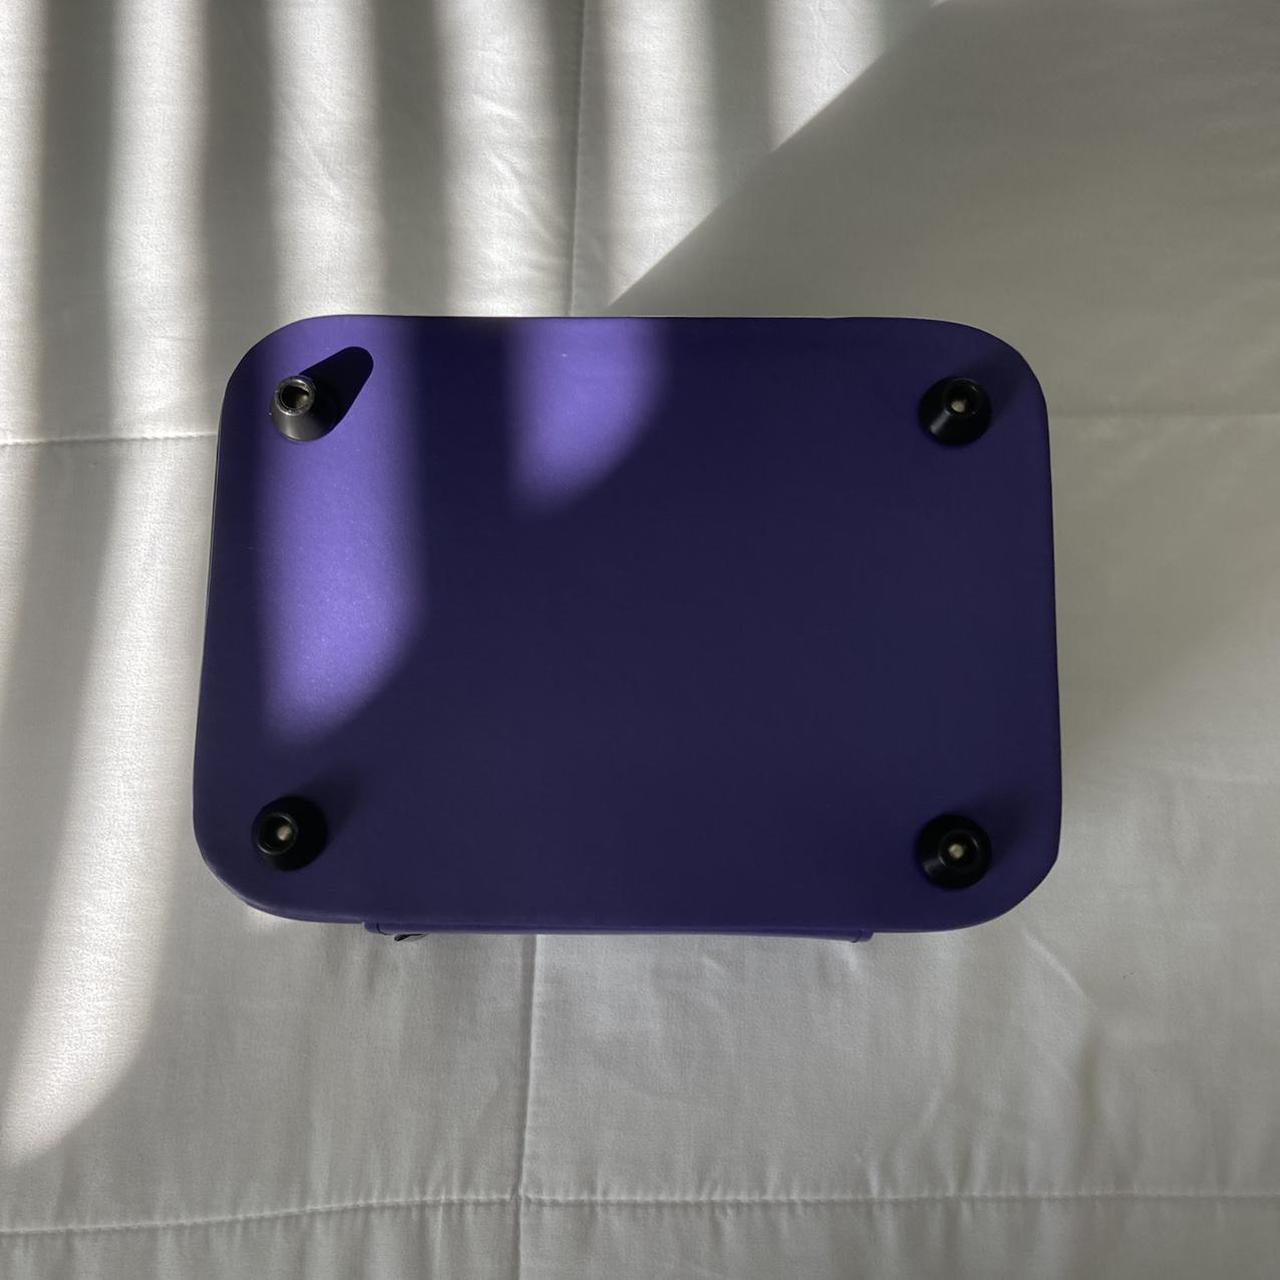 Product Image 2 - Purple Makeup Case

Shipping $6.75

In good